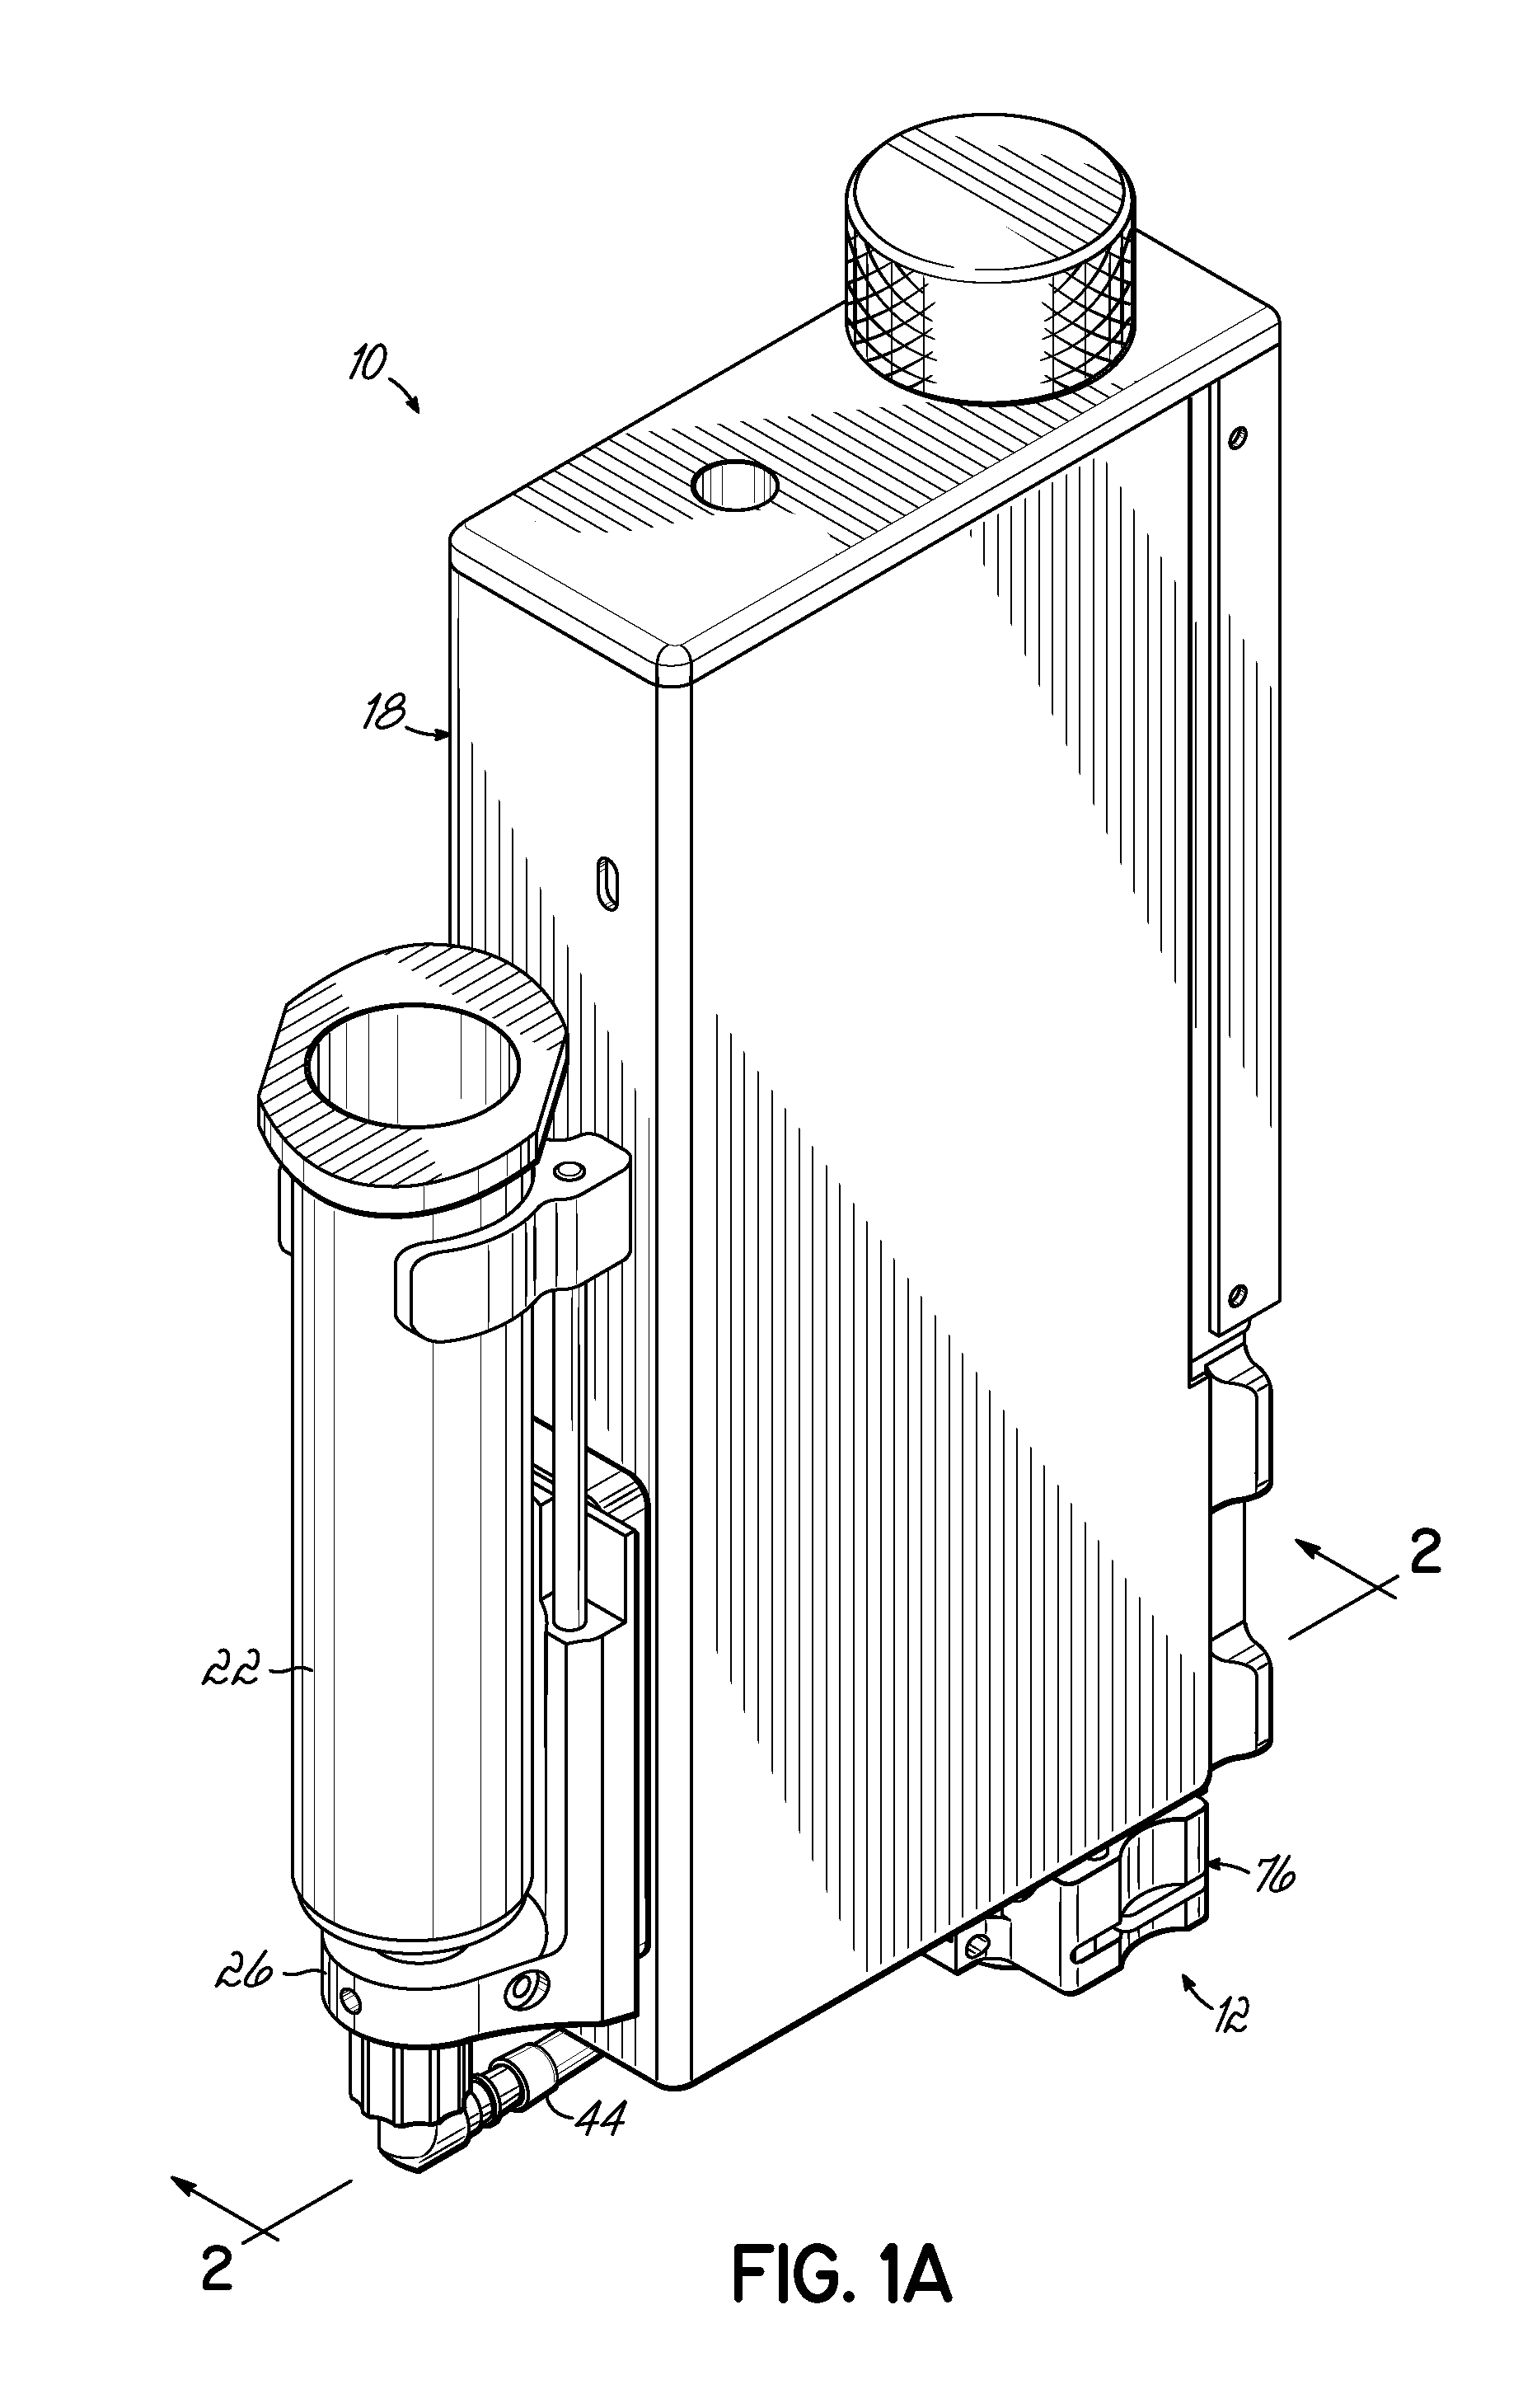 Pneumatically-driven jetting valves with variable drive pin velocity, improved jetting systems and improved jetting methods